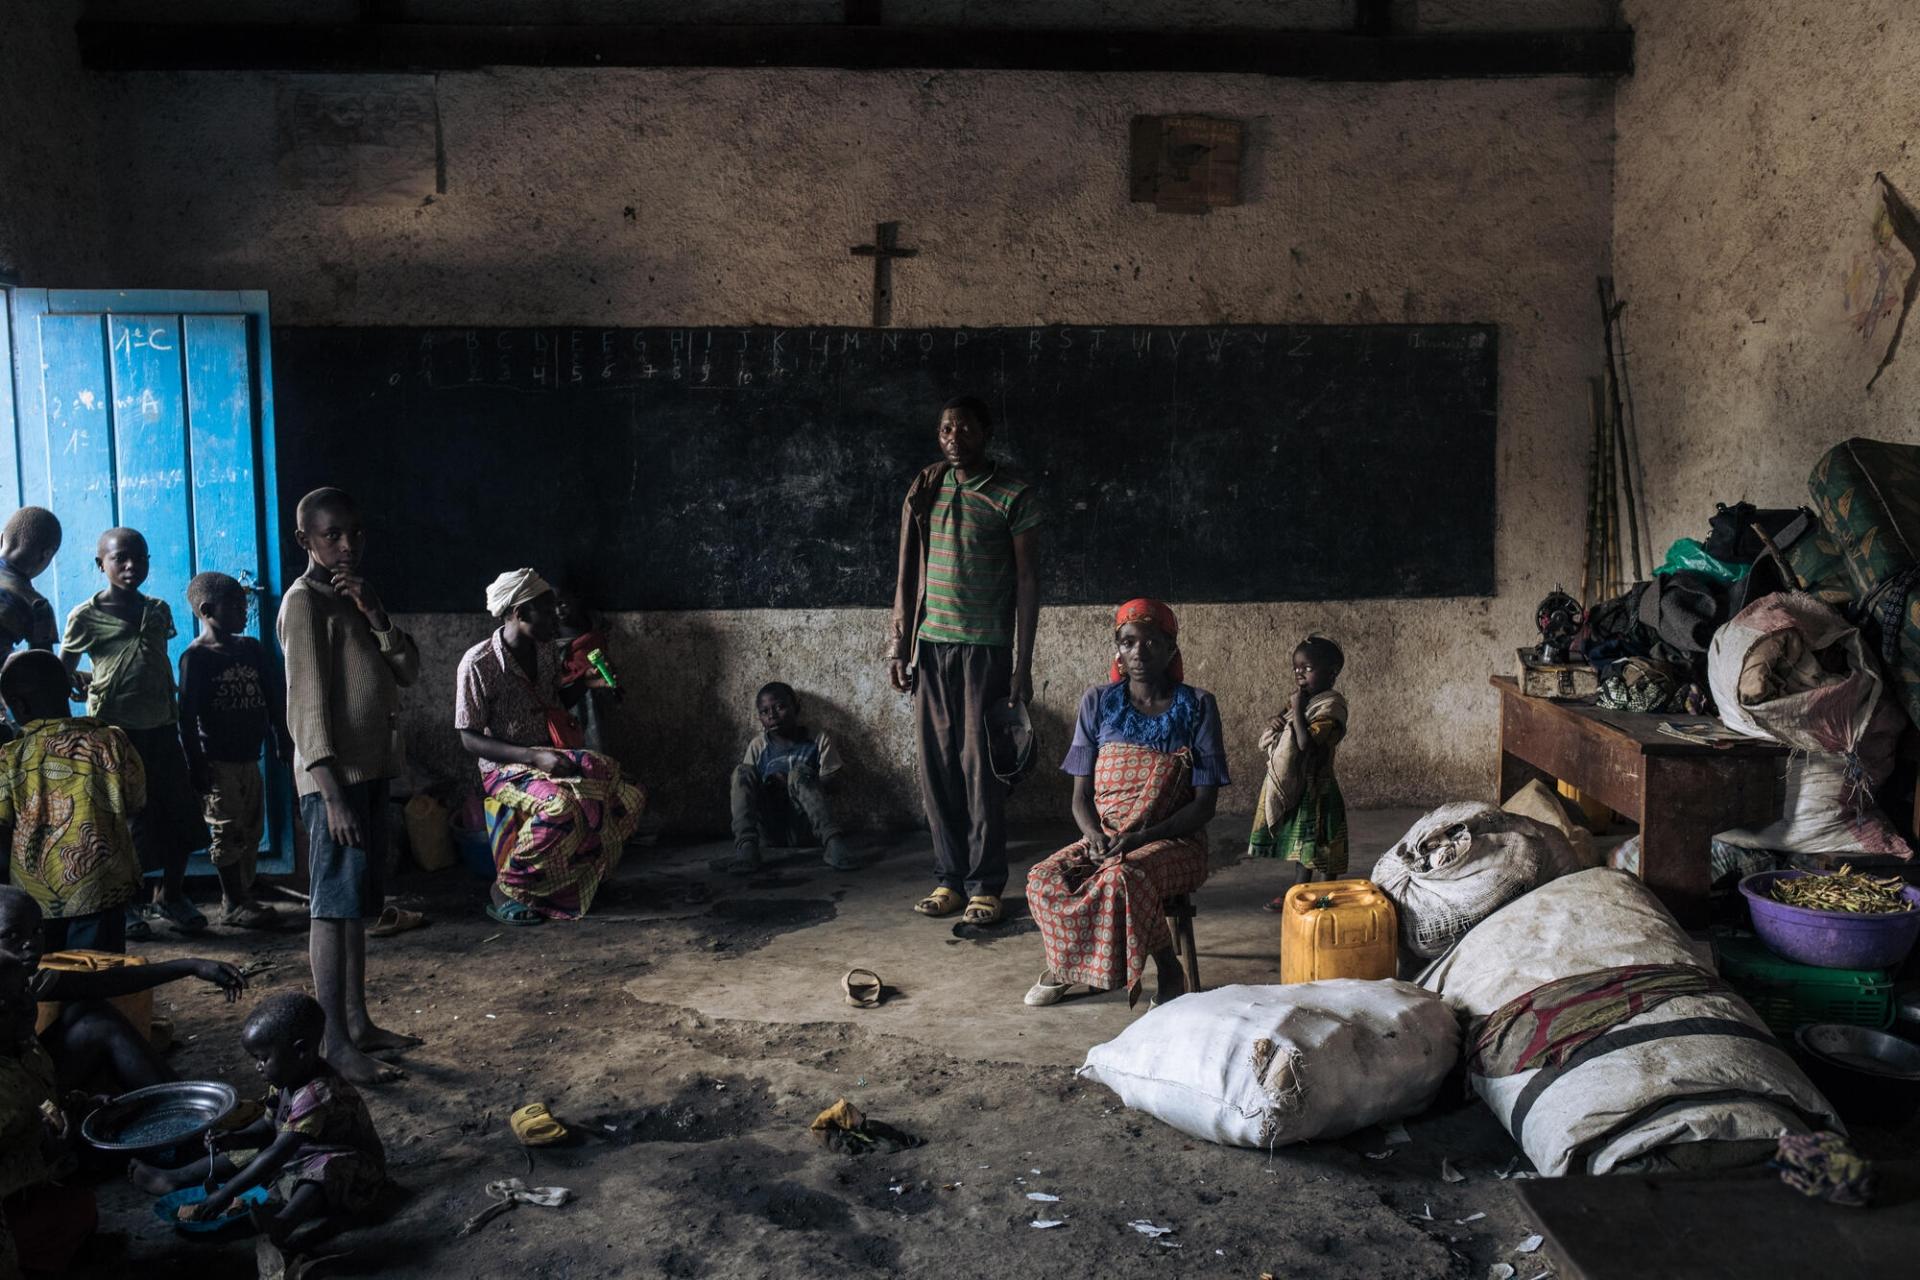 Displaced people, including children, stand in the classroom at Rumangabo Elementary School, which in recent weeks has been turned into an internally displaced site housing more than 3,000 people.